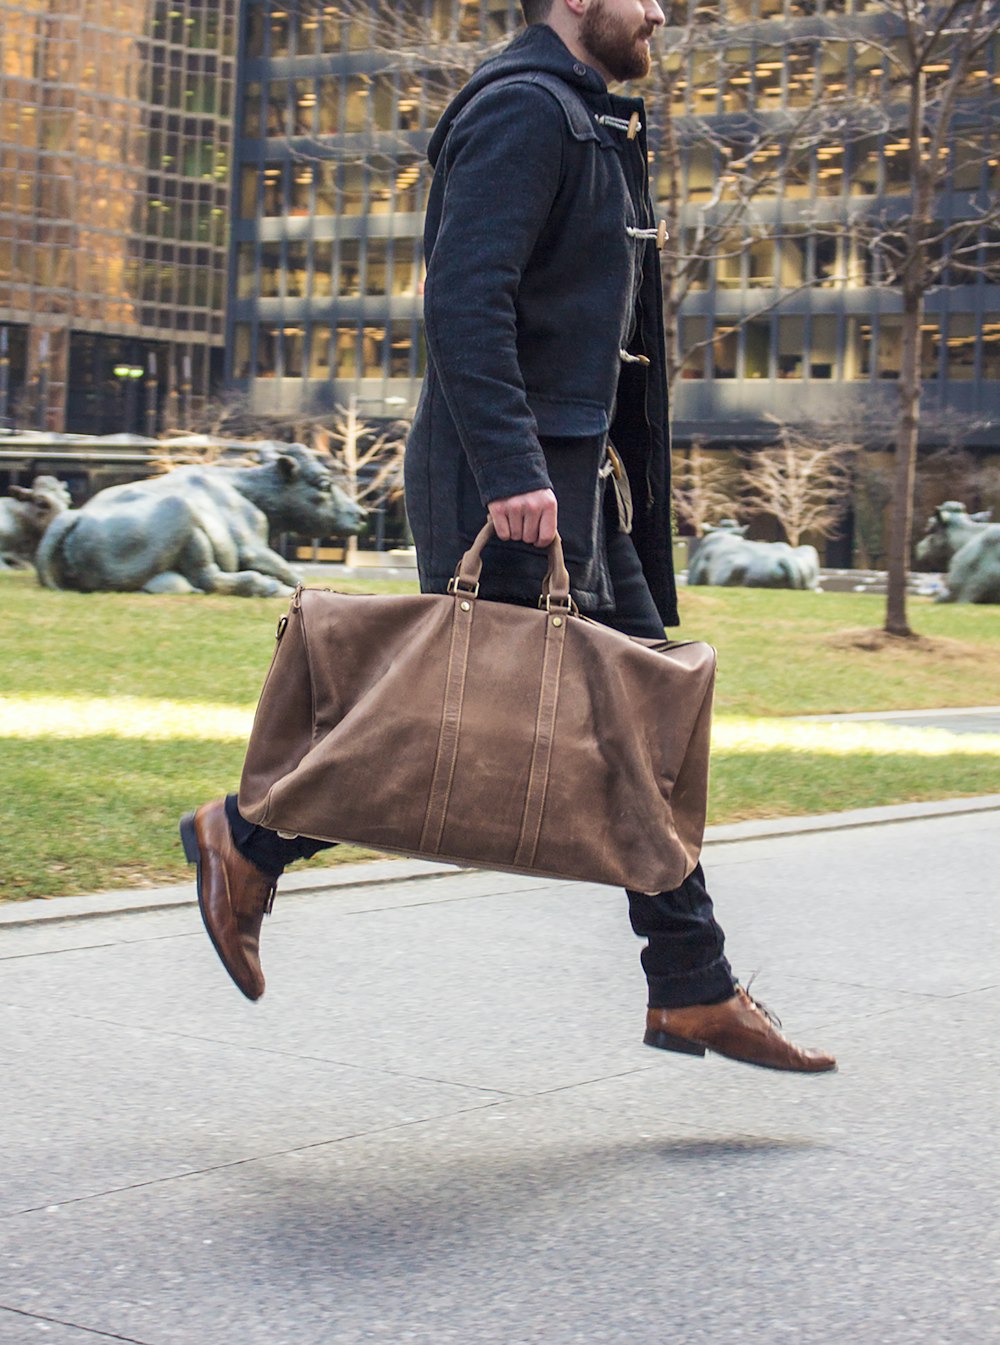 person in black pants and brown leather sling bag walking on sidewalk during daytime